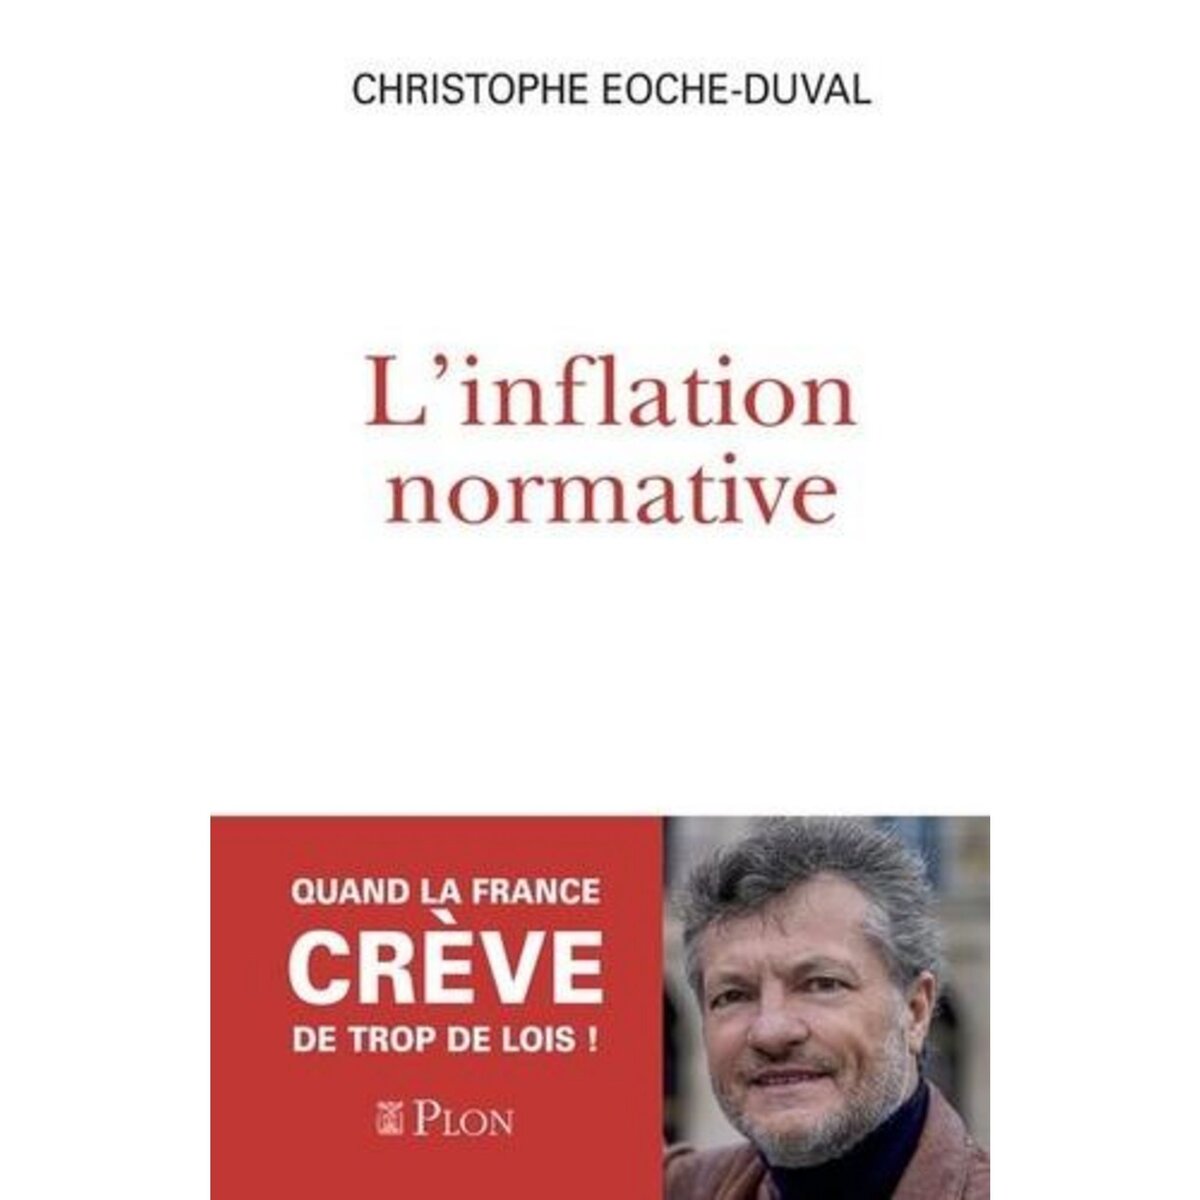  L'INFLATION NORMATIVE, Eoche-Duval Christophe